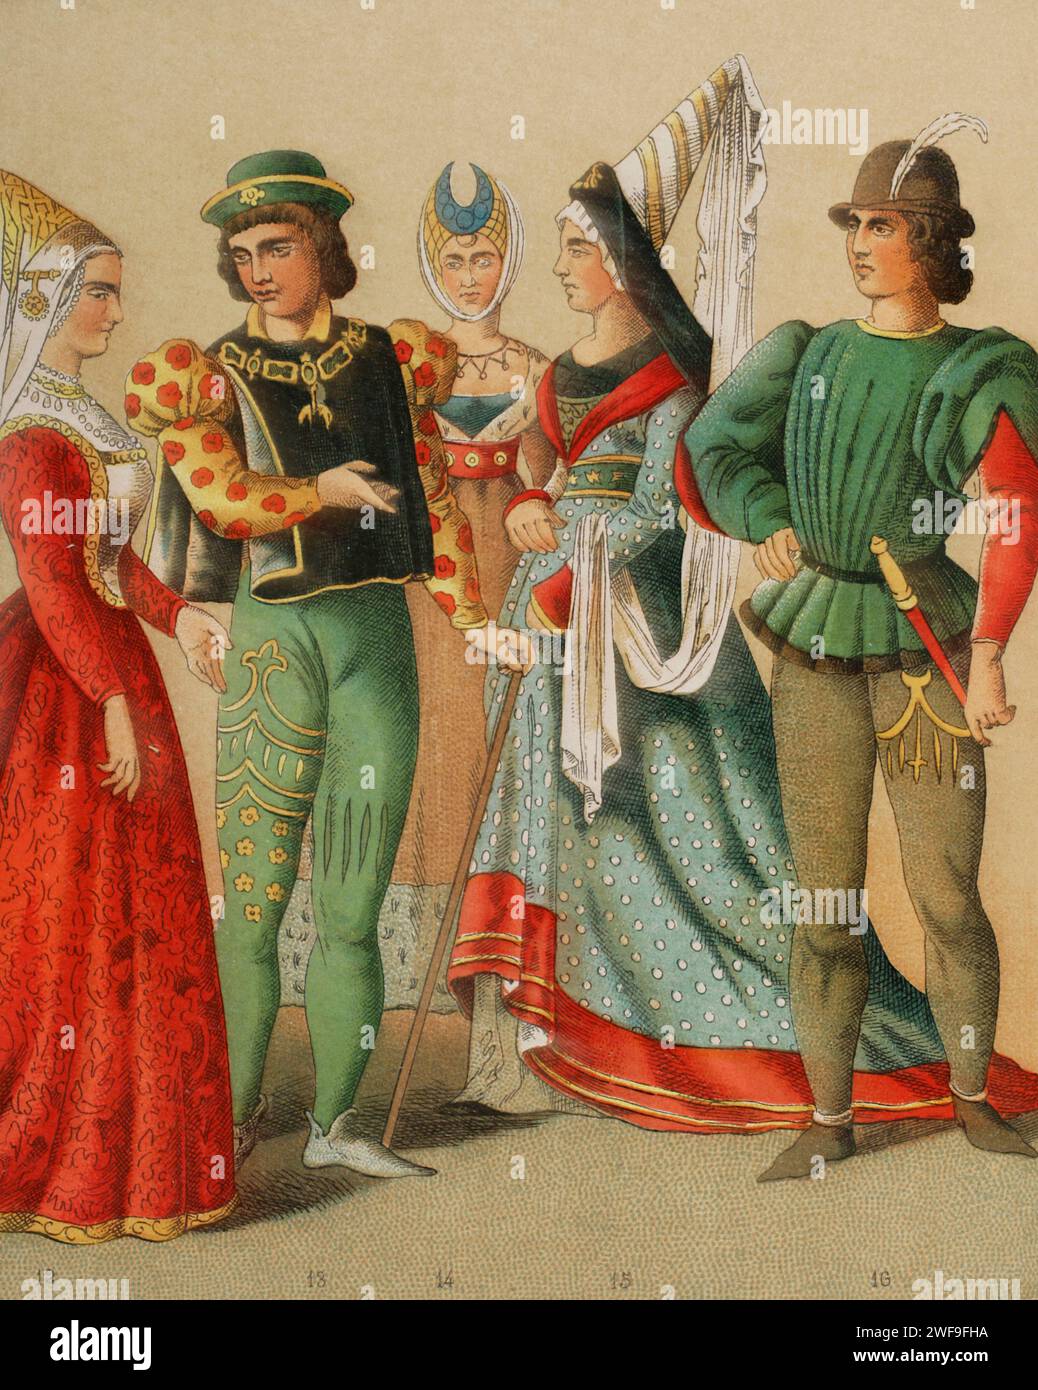 History of France. 1400. Ladies and gentlemen of the nobility. Chromolithography. 'Historia Universal', by César Cantú. Volume VI, 1885. Stock Photo